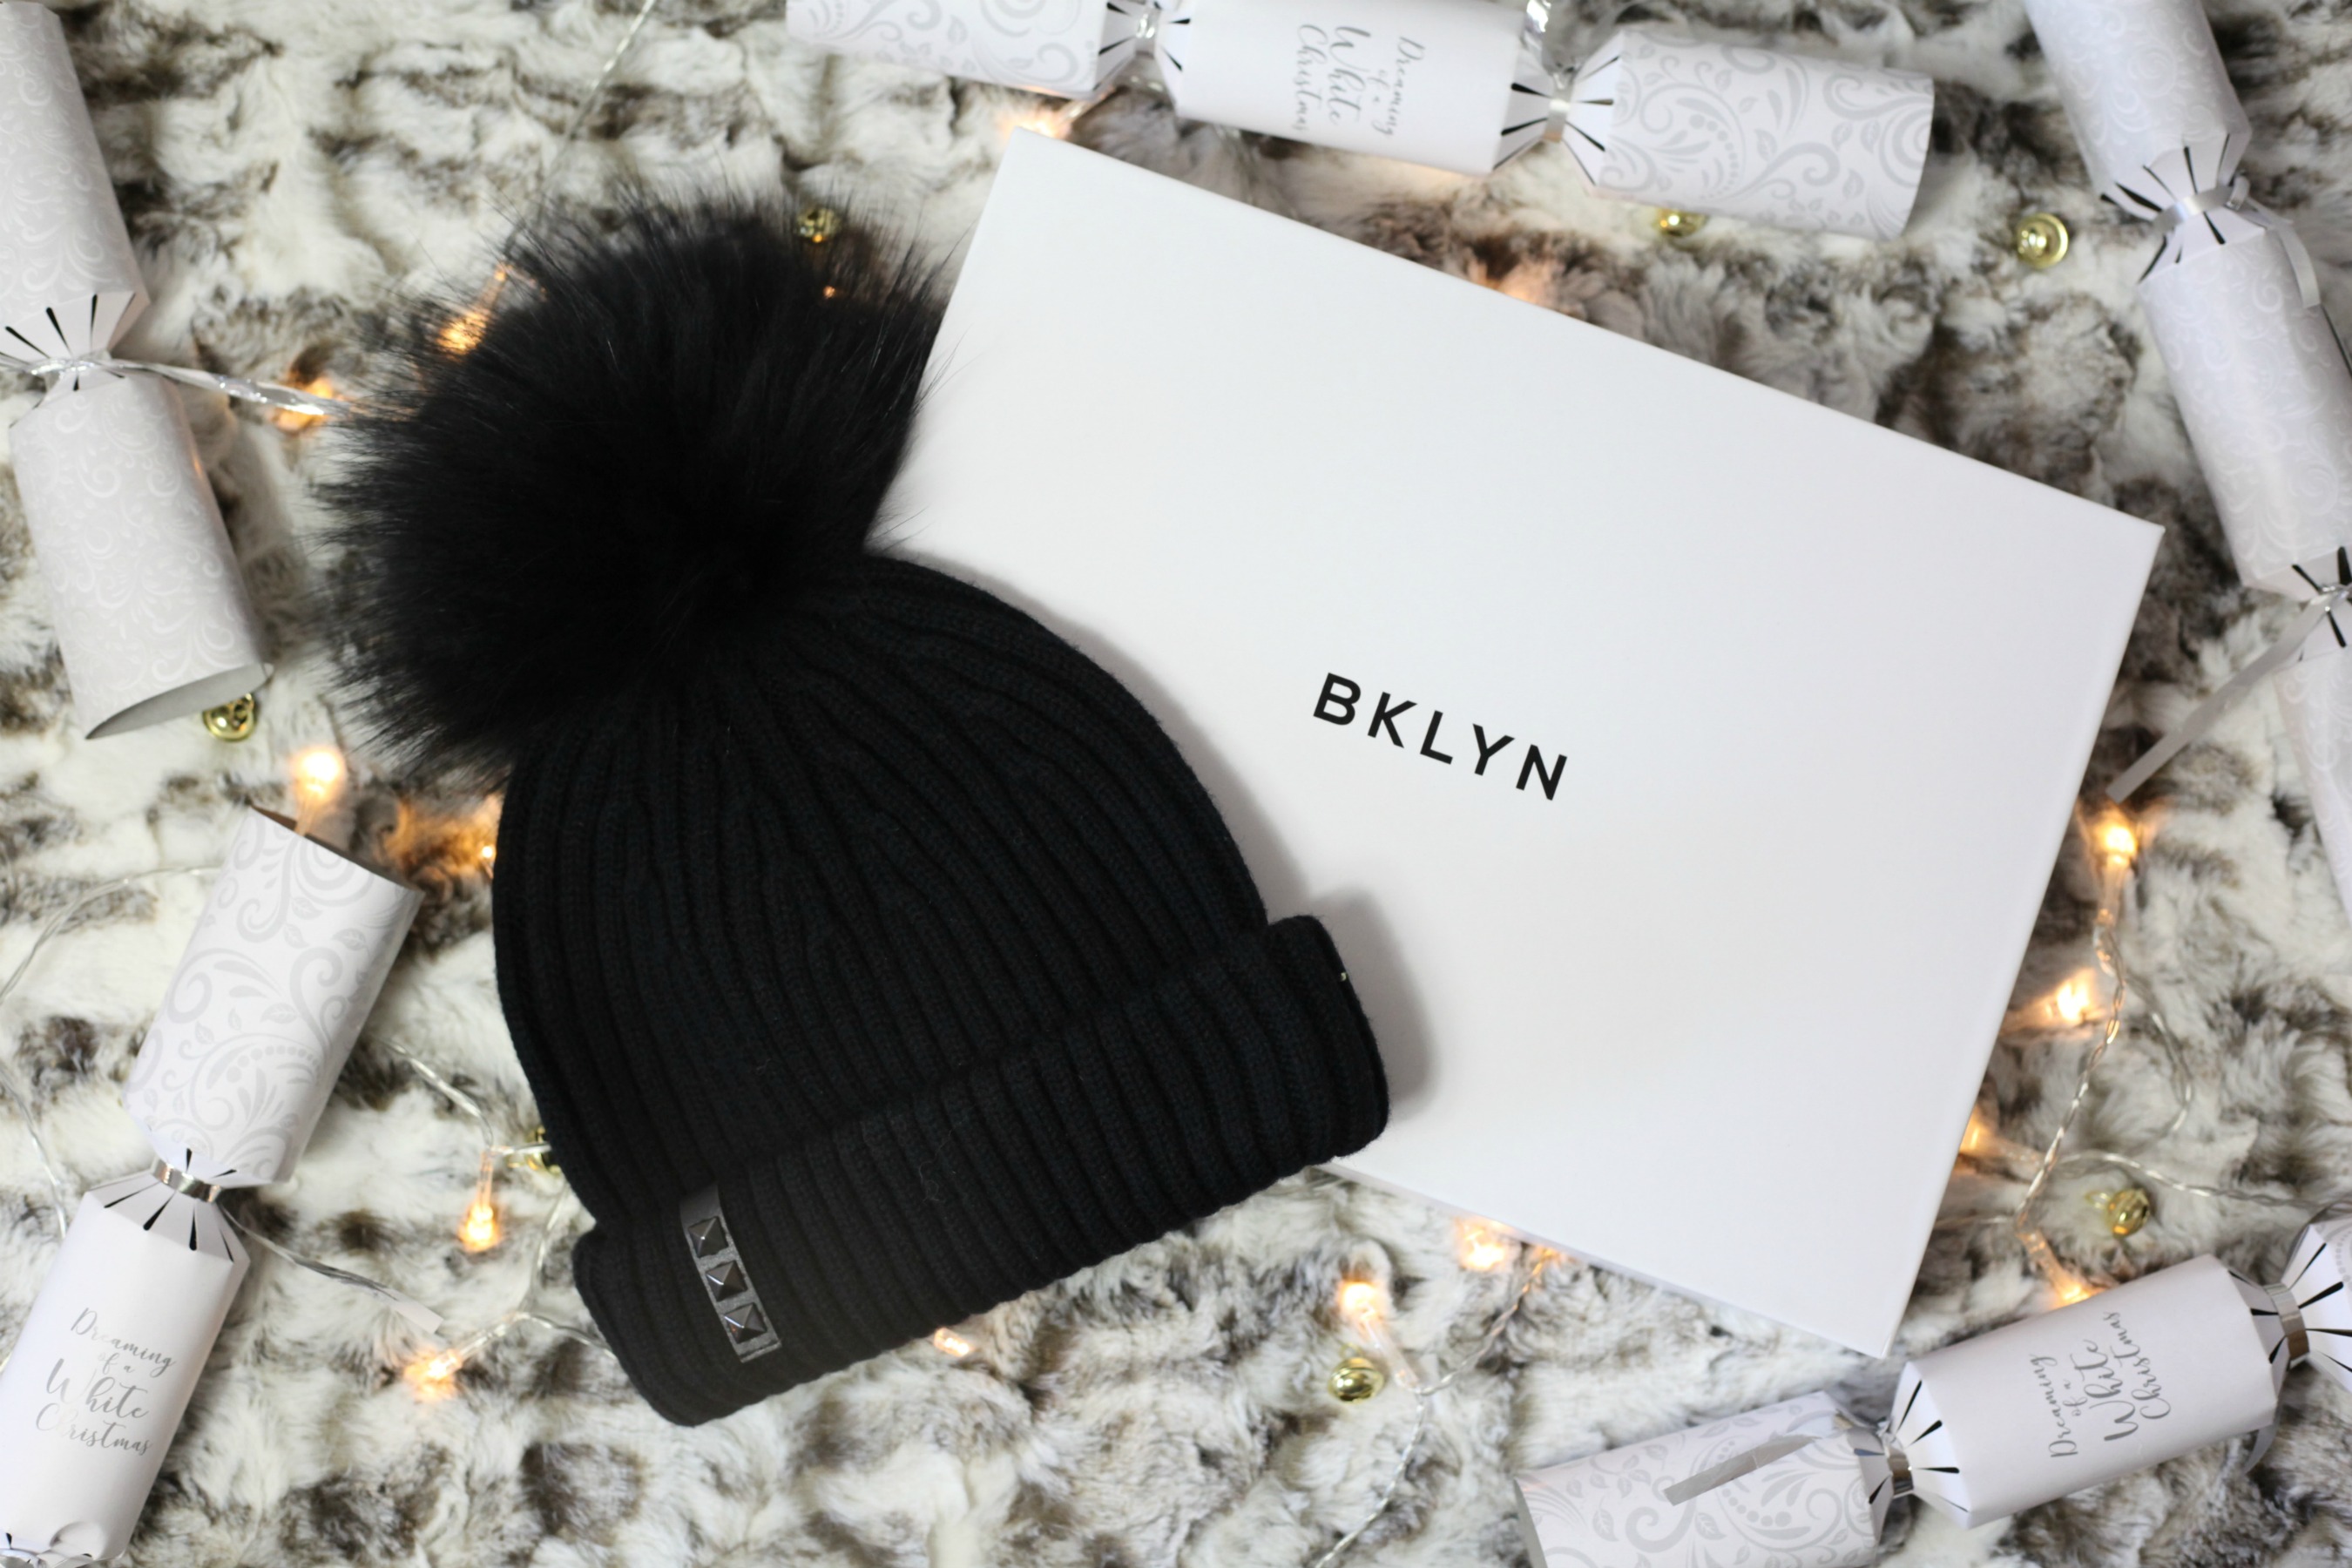 Luxurious Christmas gift ideas from BKLYN like this pom pom hat